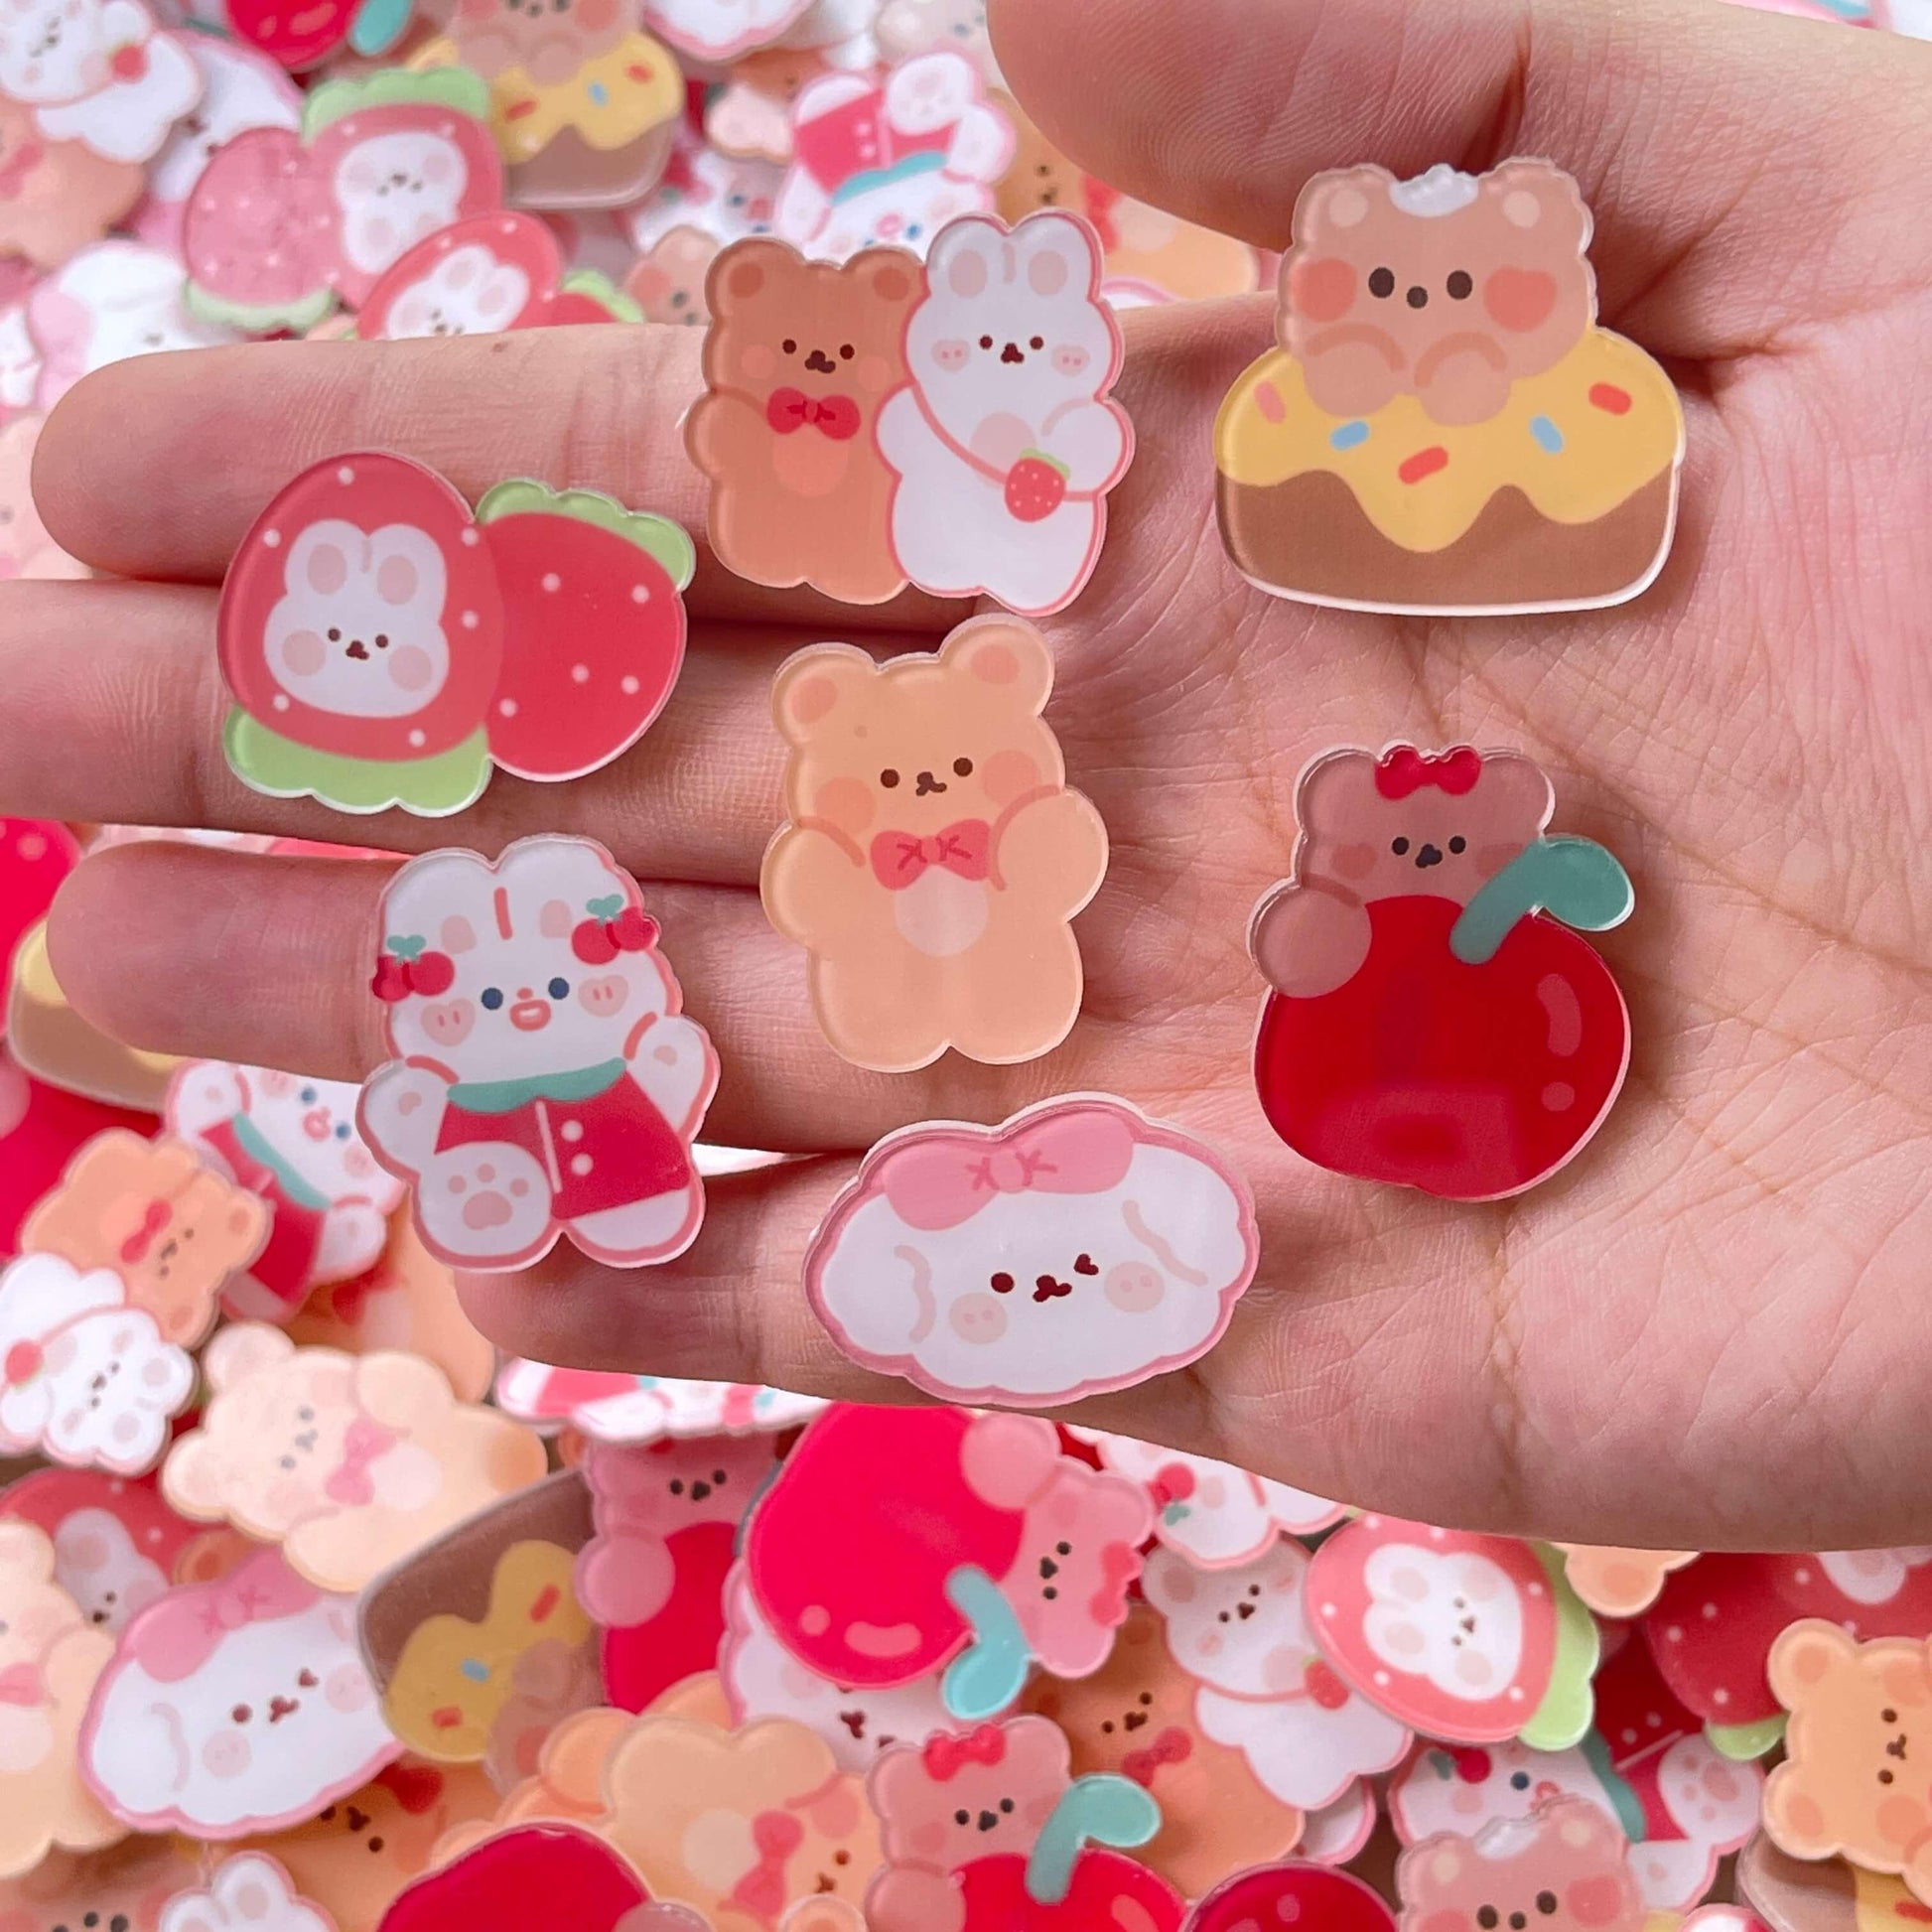 [Happy Scoop] 1 Scoop of Cute Kawaii Pins for T-Shirt, Jeans, Backpacks and etc.-NEW Space Theme Added & More New Kawaii Animals! A Big Bag (30~33 Pcs